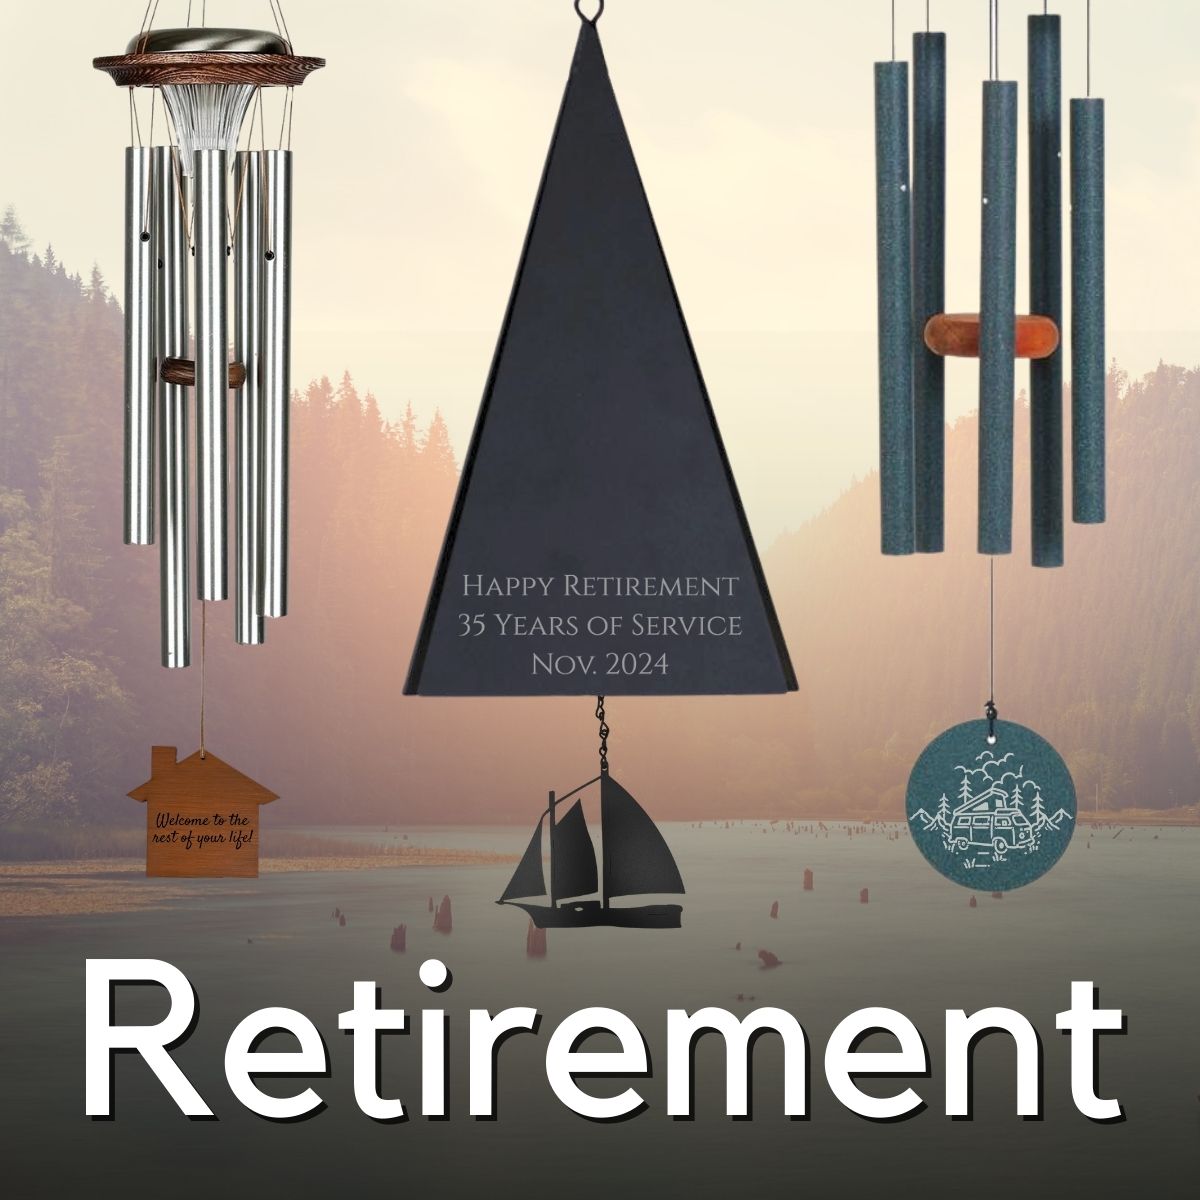 Engraved Retirement Wind Chimes: A Unique & Meaningful Gift